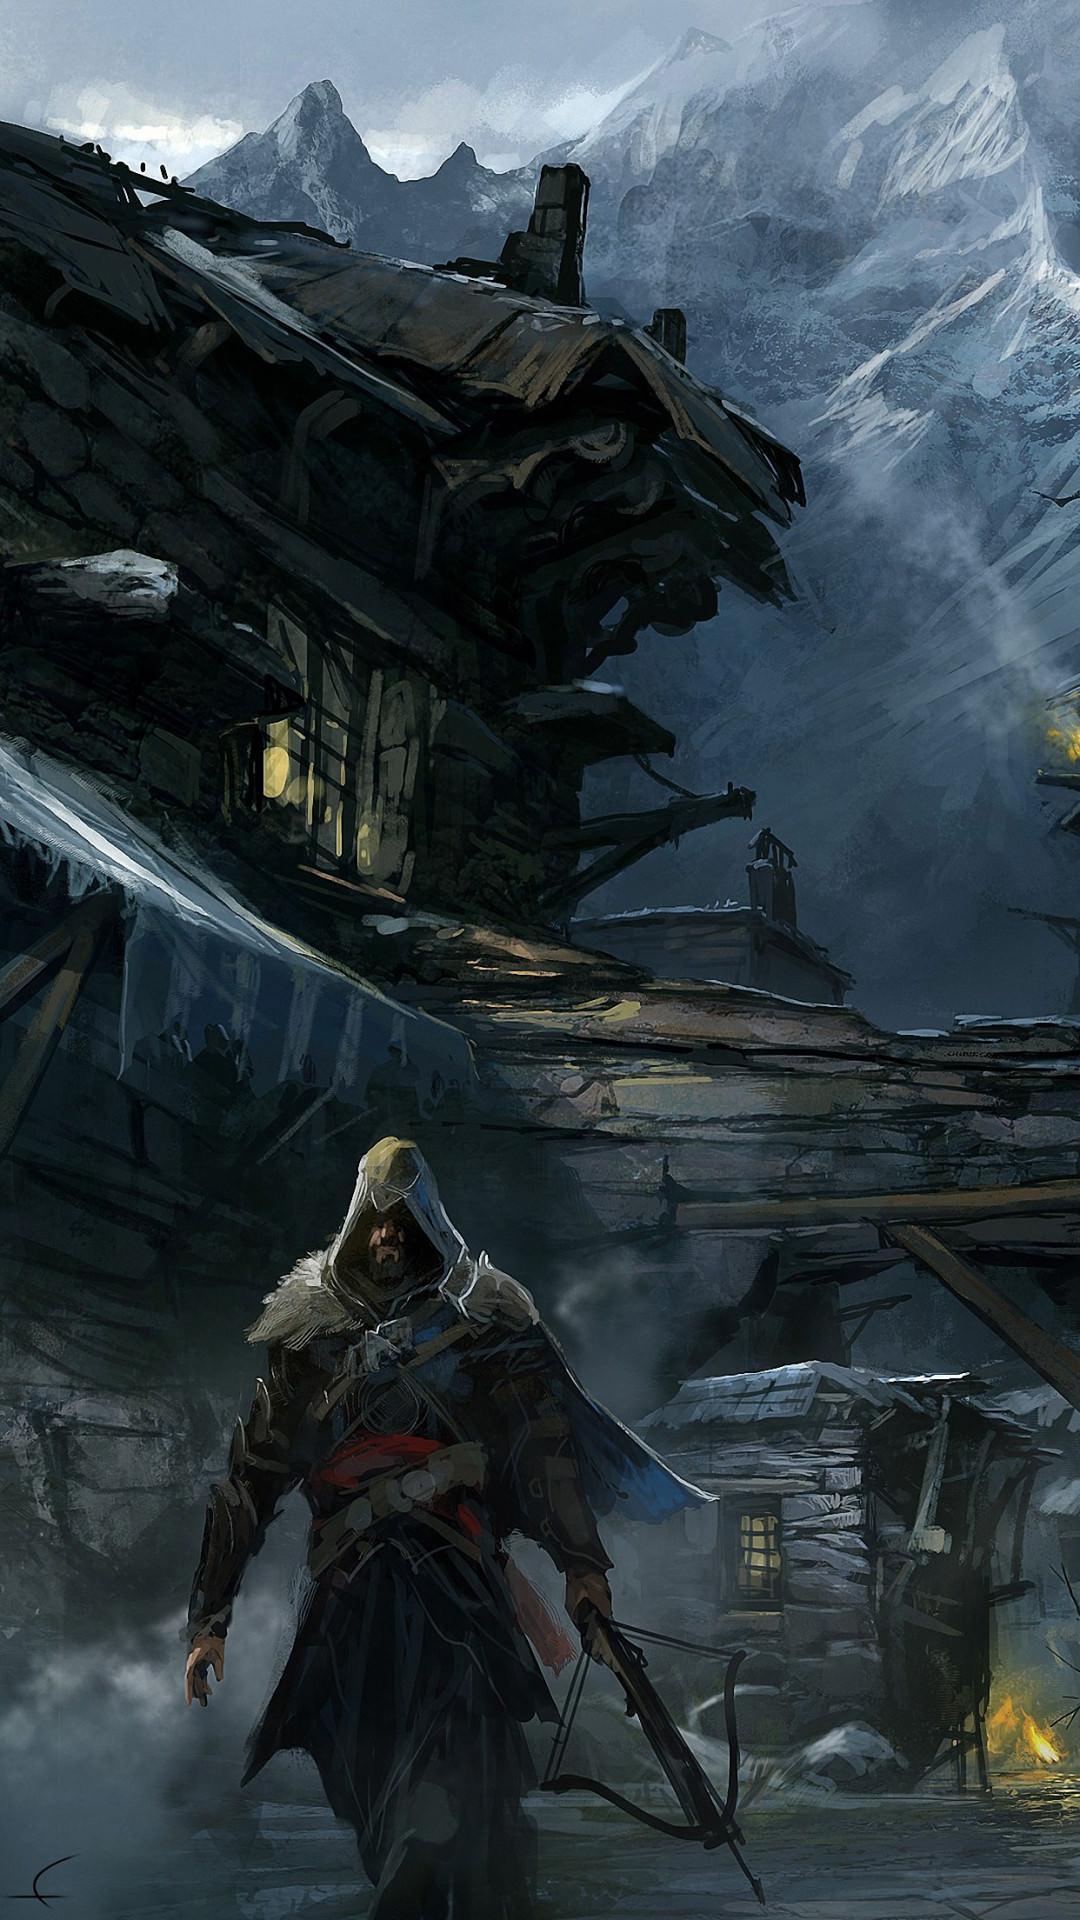 Full HD 1080p, Assassin's Creed Android Wallpaper Gallery